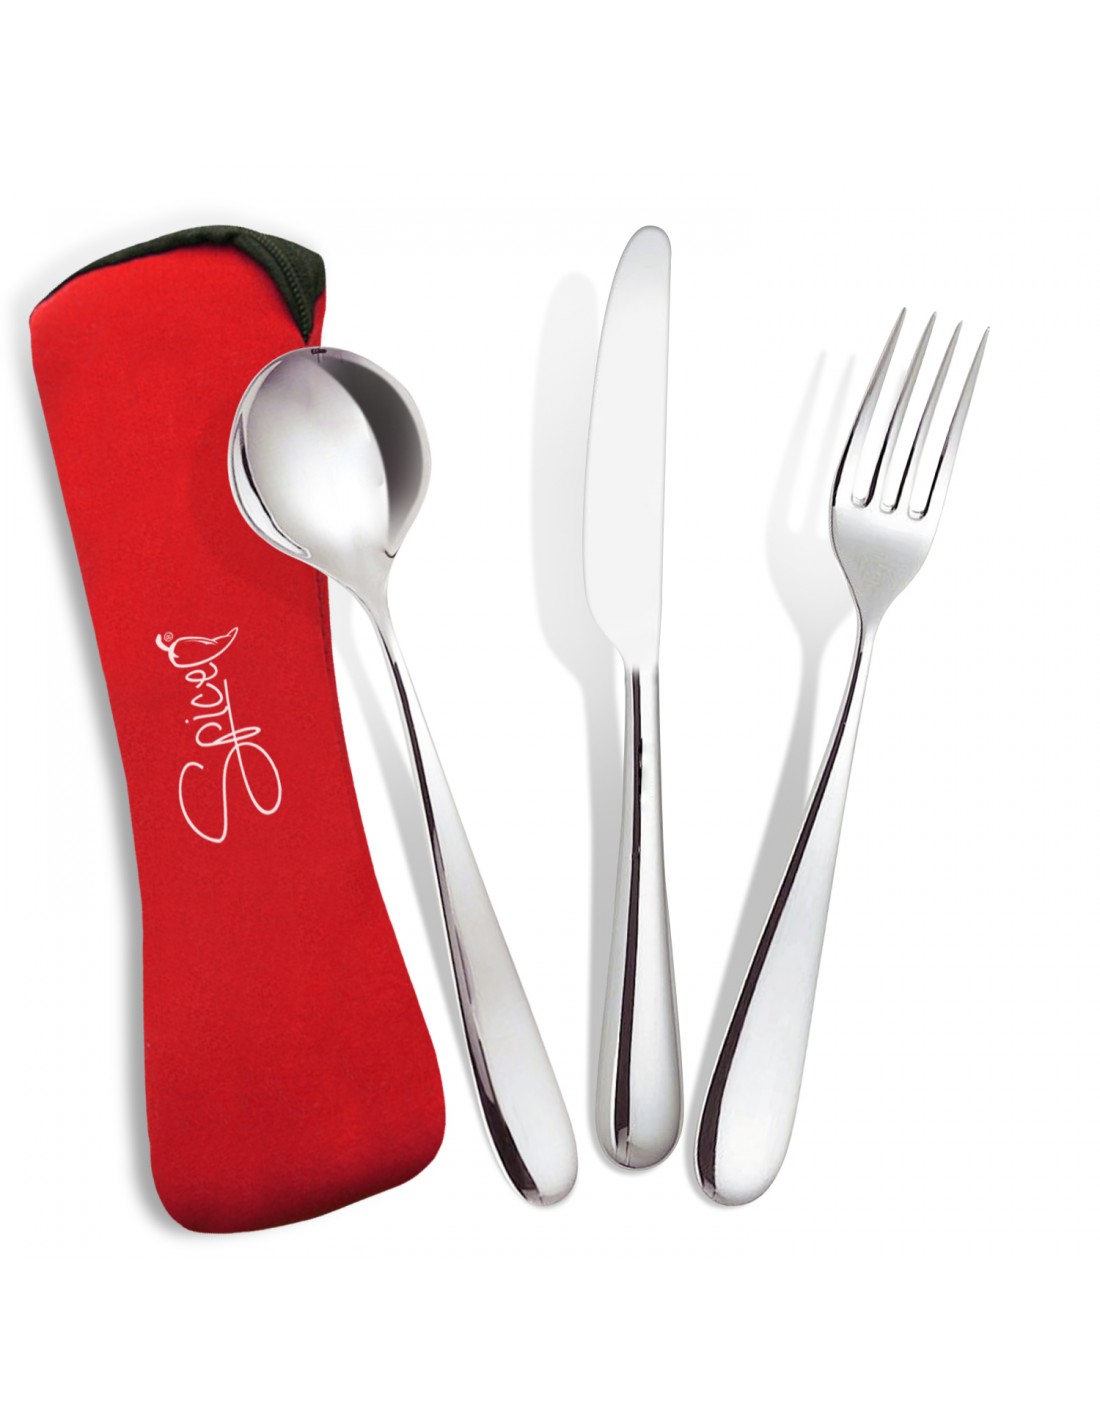 Posate in acciaio INOX 3 pieces travel cutlery set Qshape 